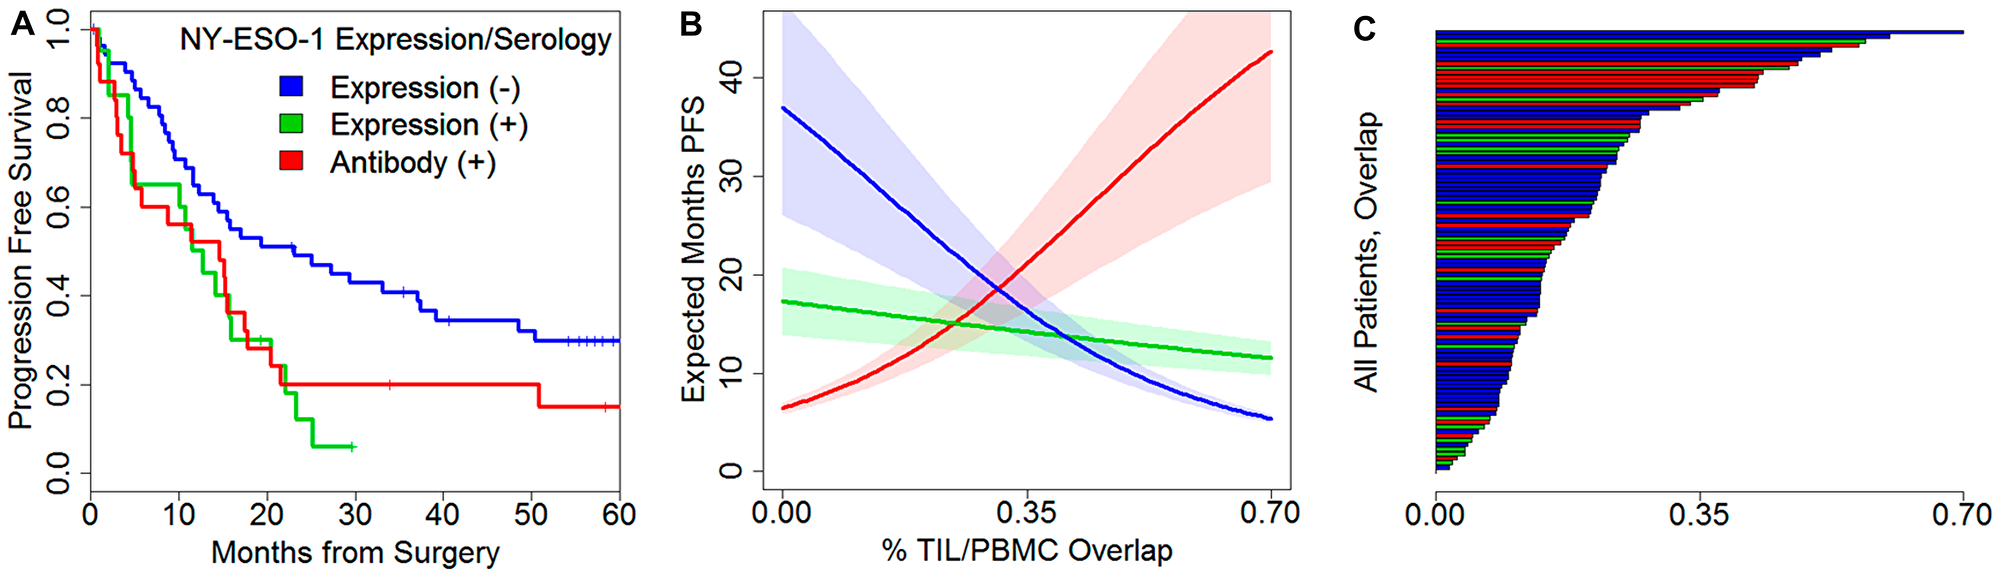 Figure 5: Prognostic effects of NY-ESO-1 expression and serology with TCR repertoire features.